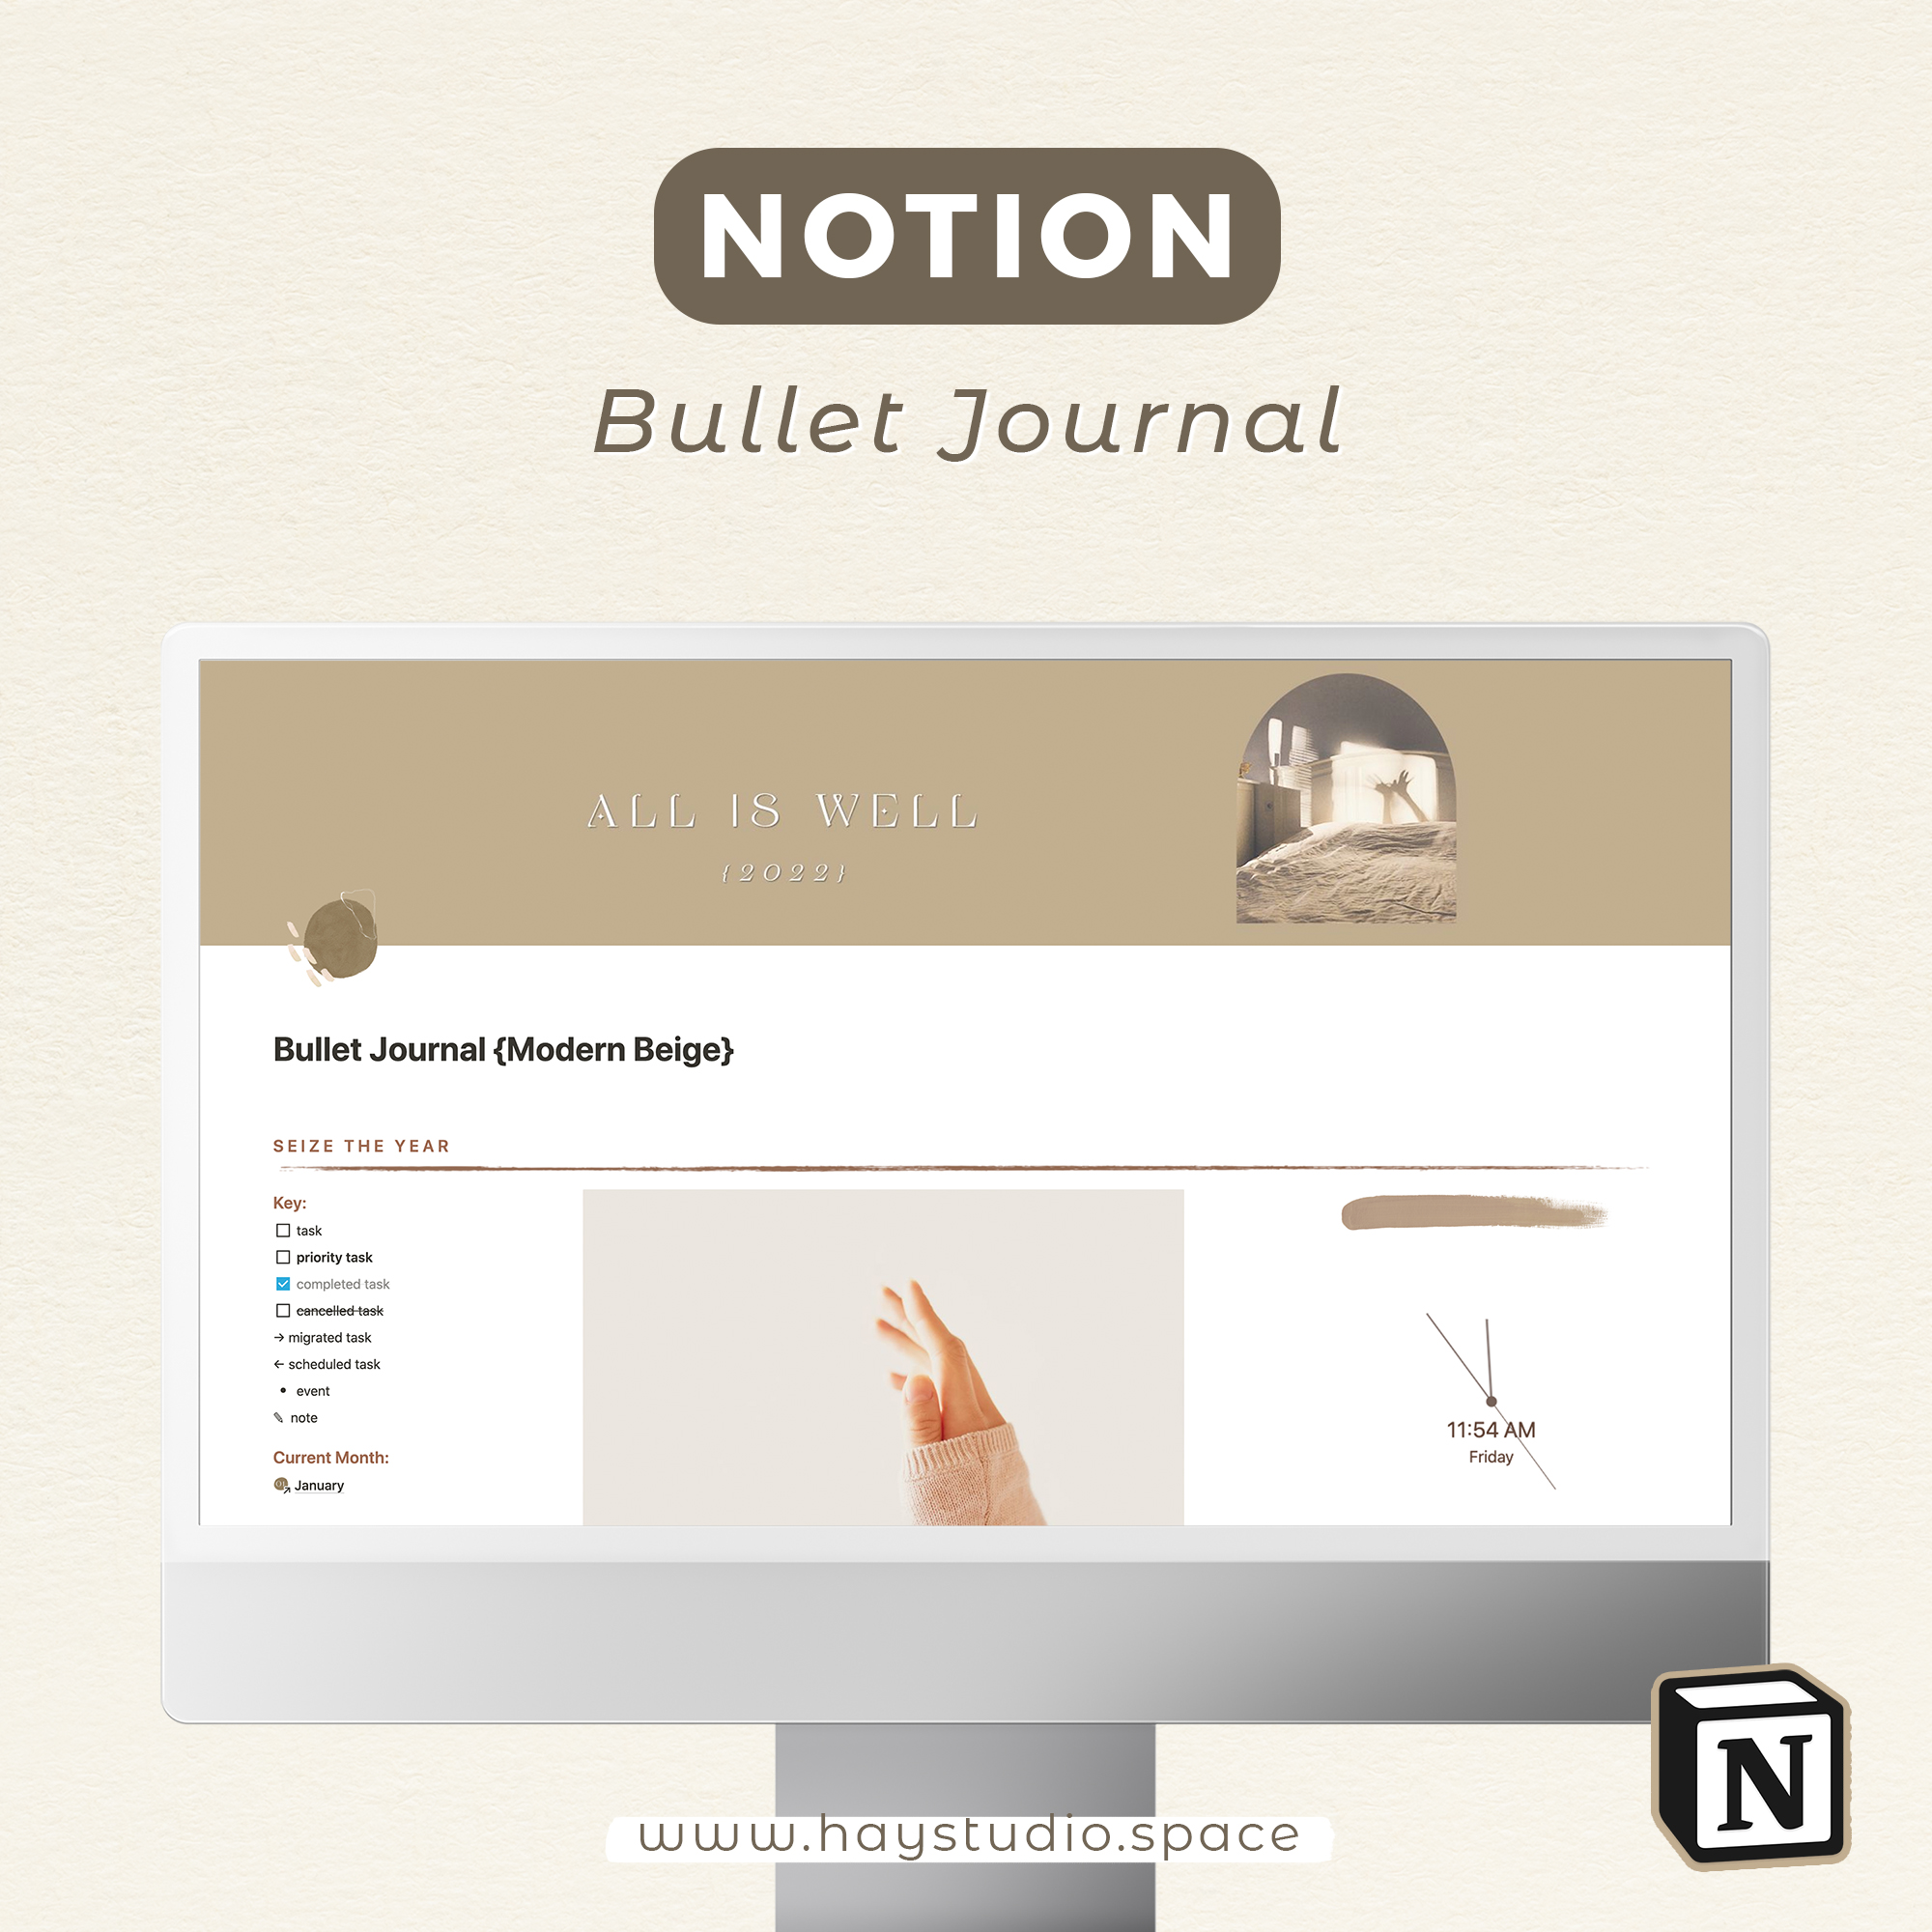 How to Create a Notion Bullet Journal (Free Notion Template) ⋆ HAY studio